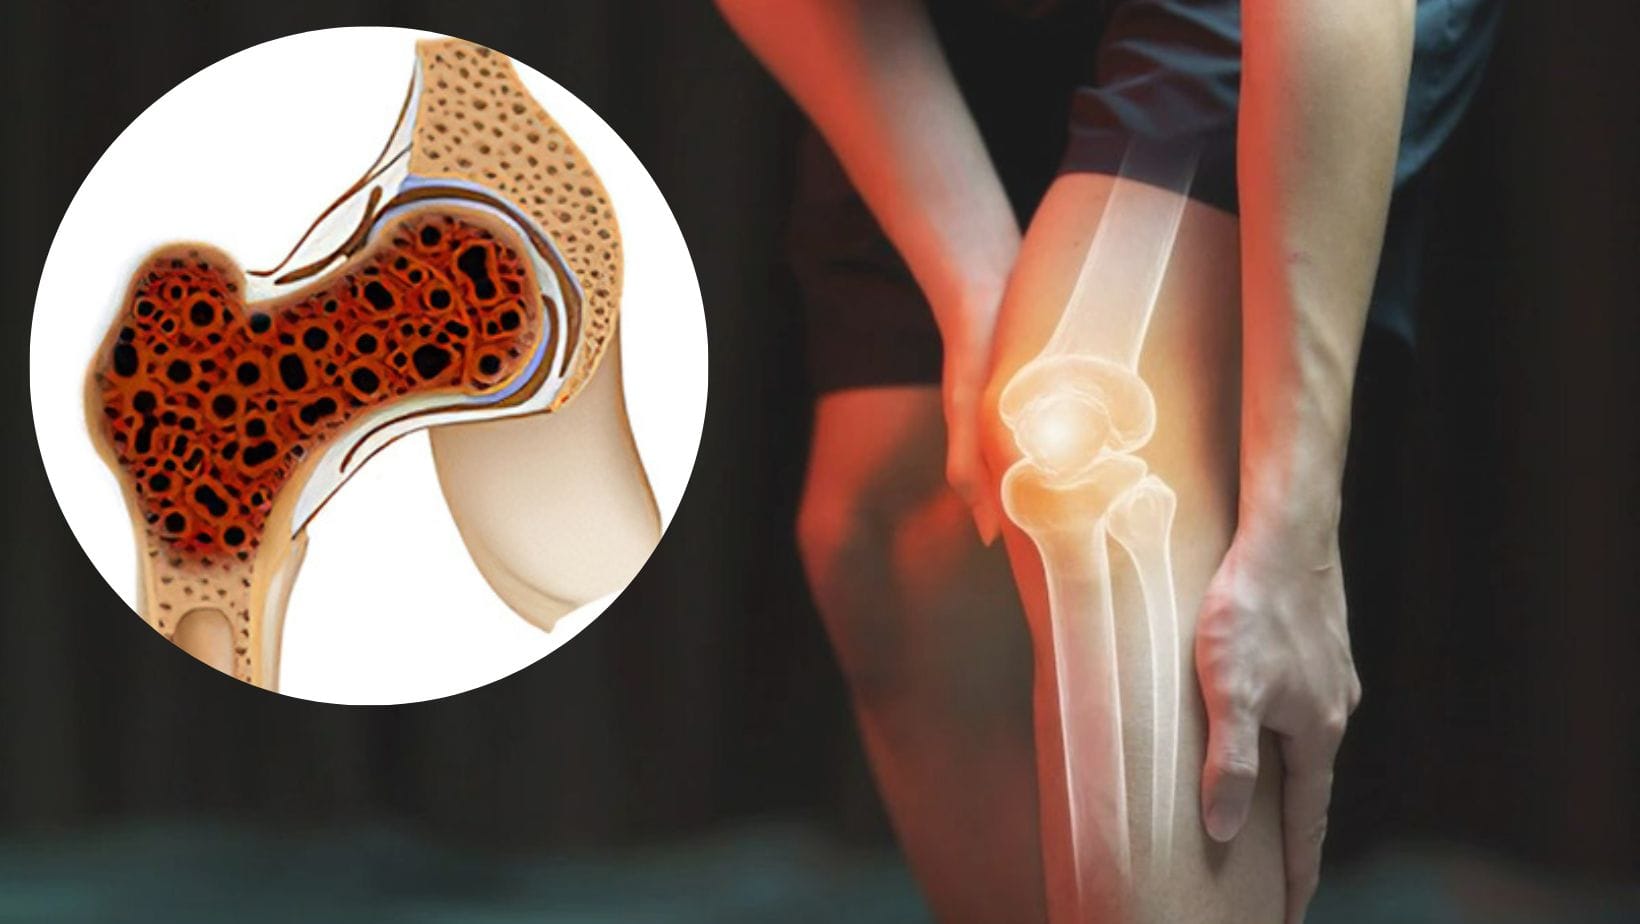 Bone Cancer Symptoms: 7 Warning Signs You Should Never Ignore